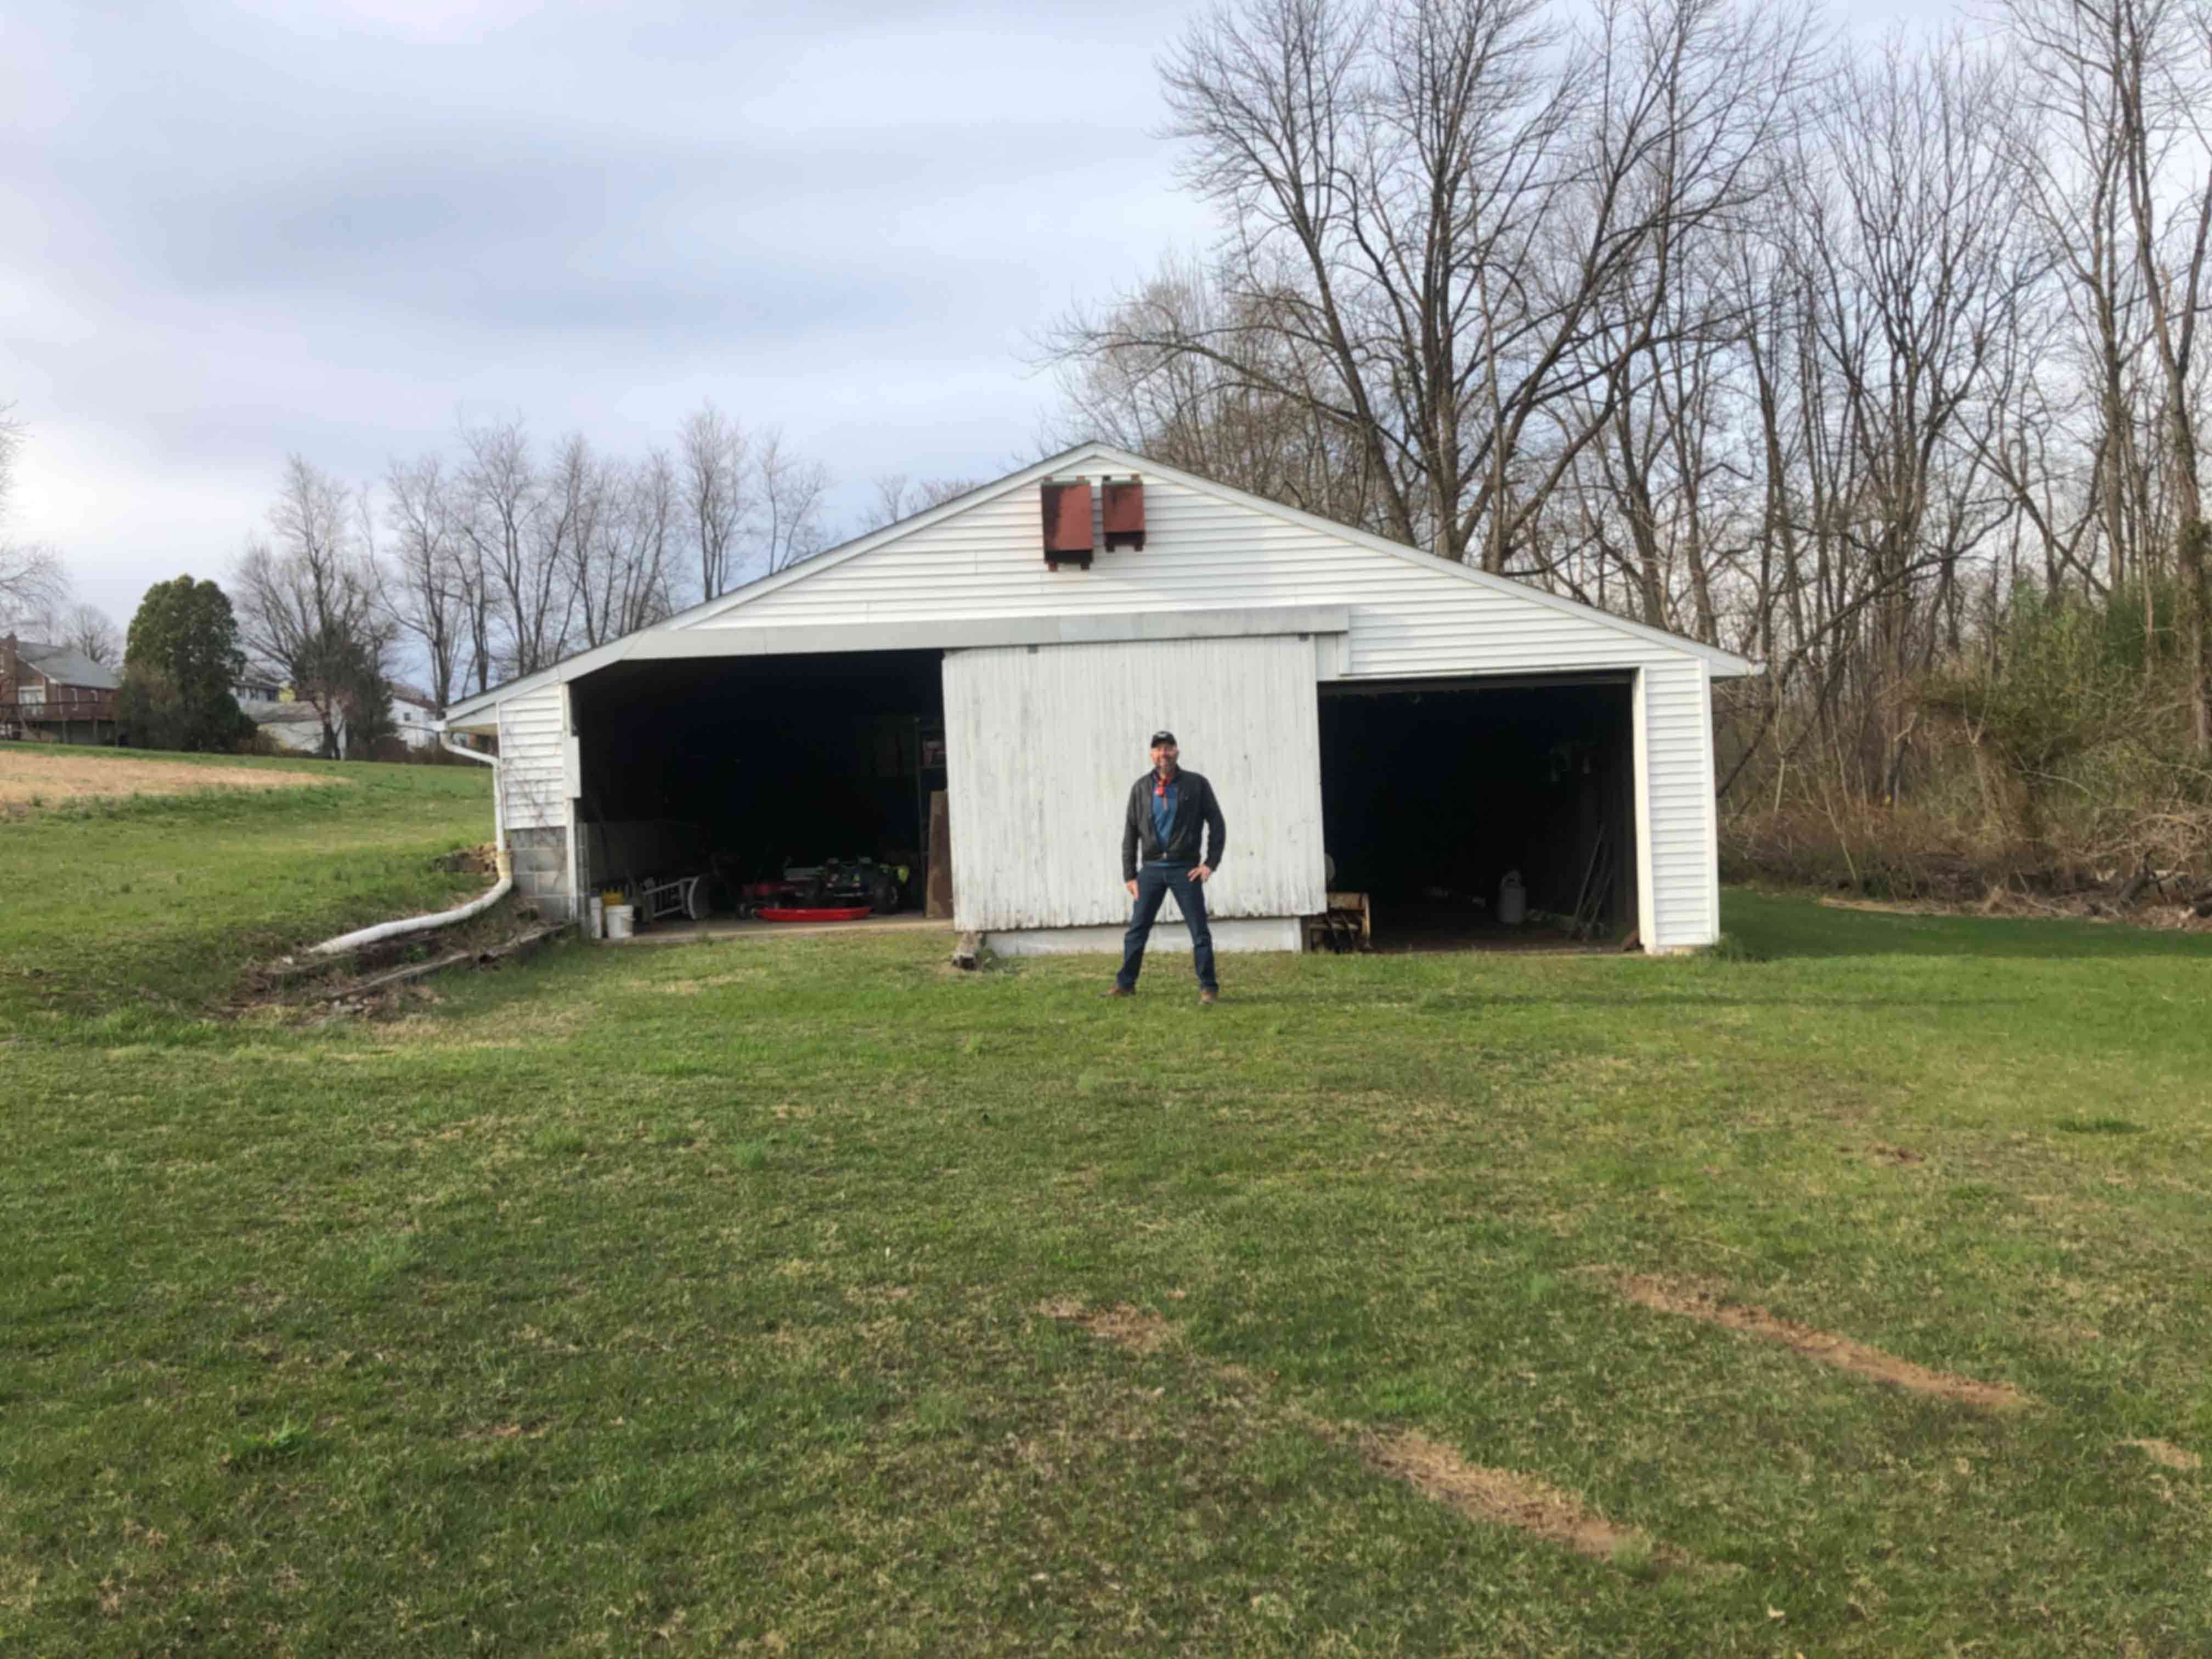 Farmer Mike in front of his barn